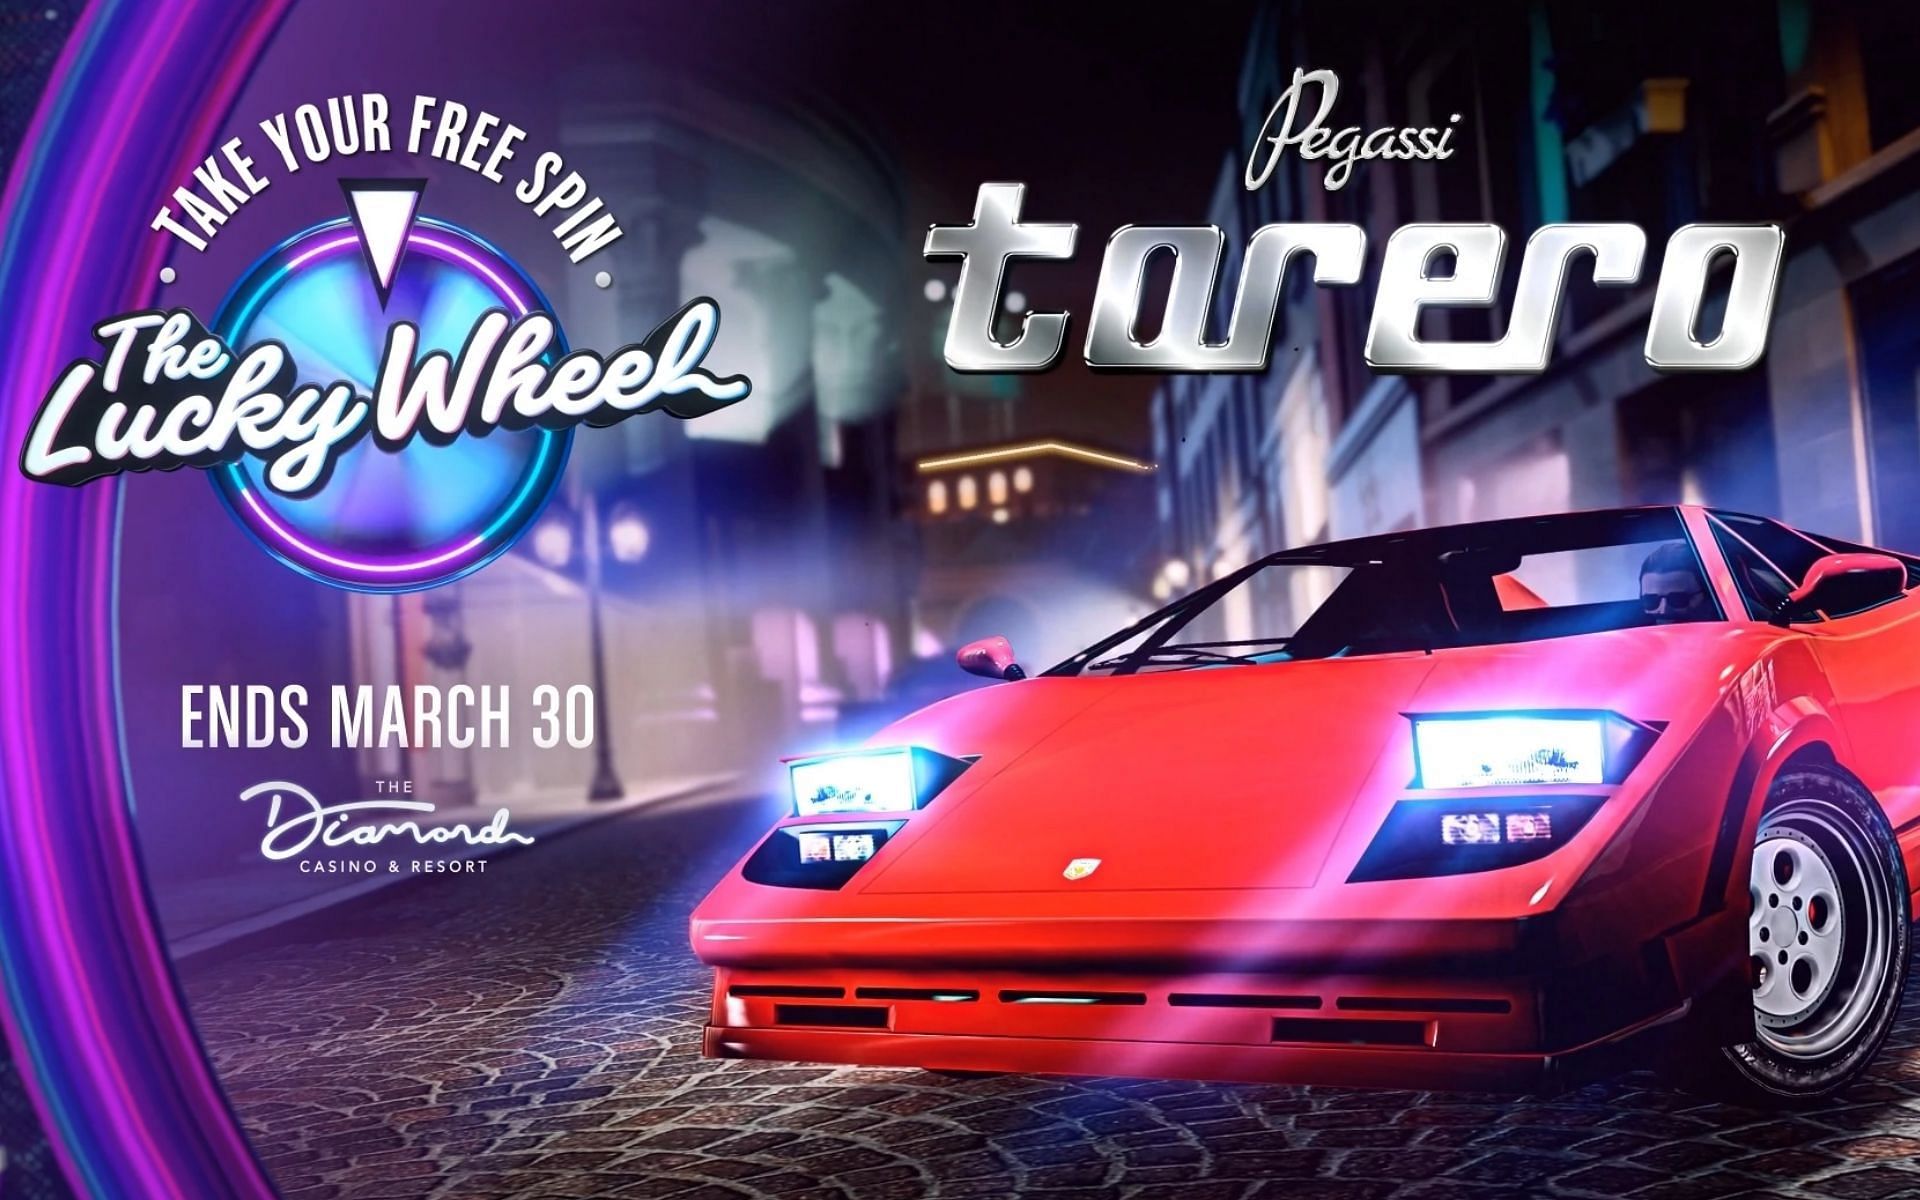 The Pegassi Torero advertisement for this week&#039;s Lucky Wheel (Image via Rockstar Games)